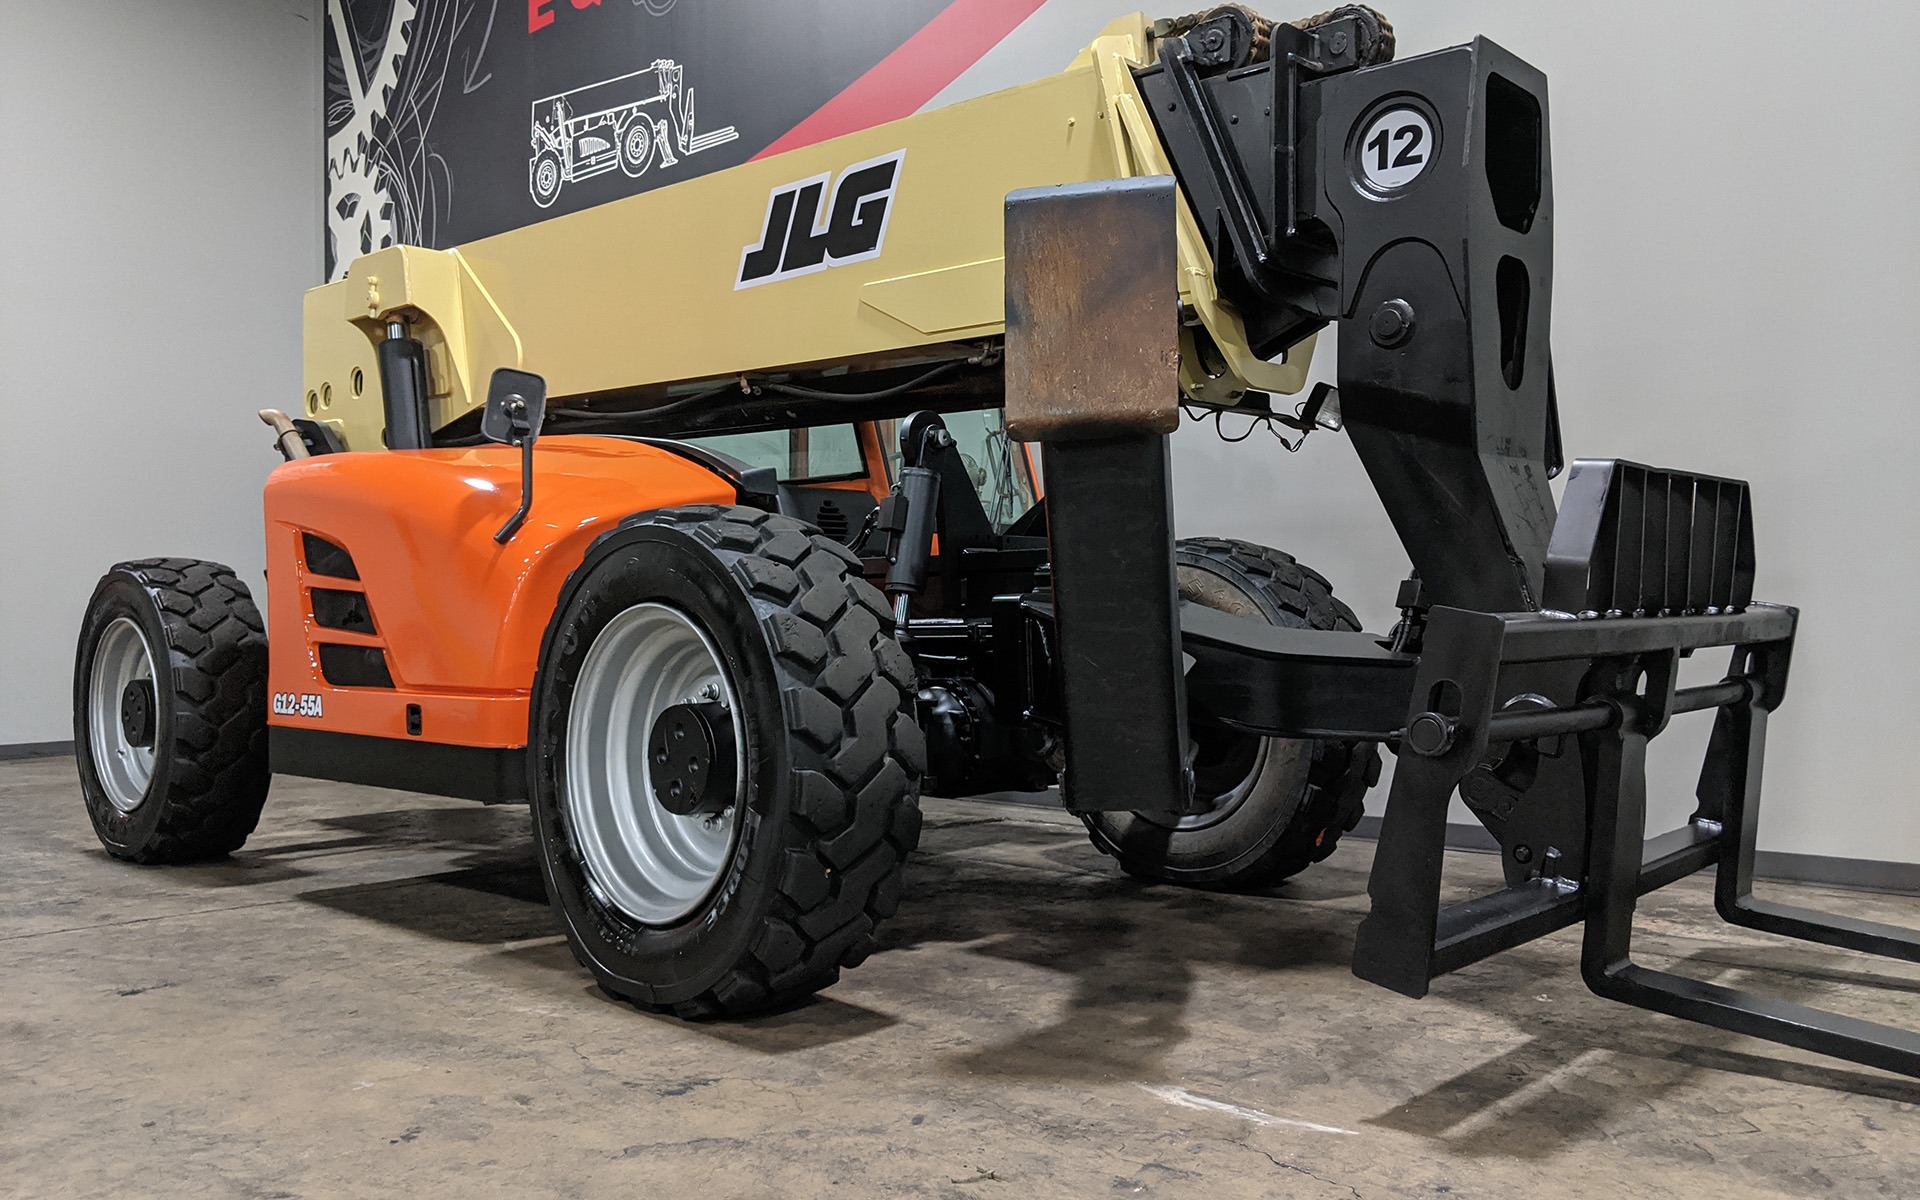 Used 2012 JLG G12-55A  | Cary, IL